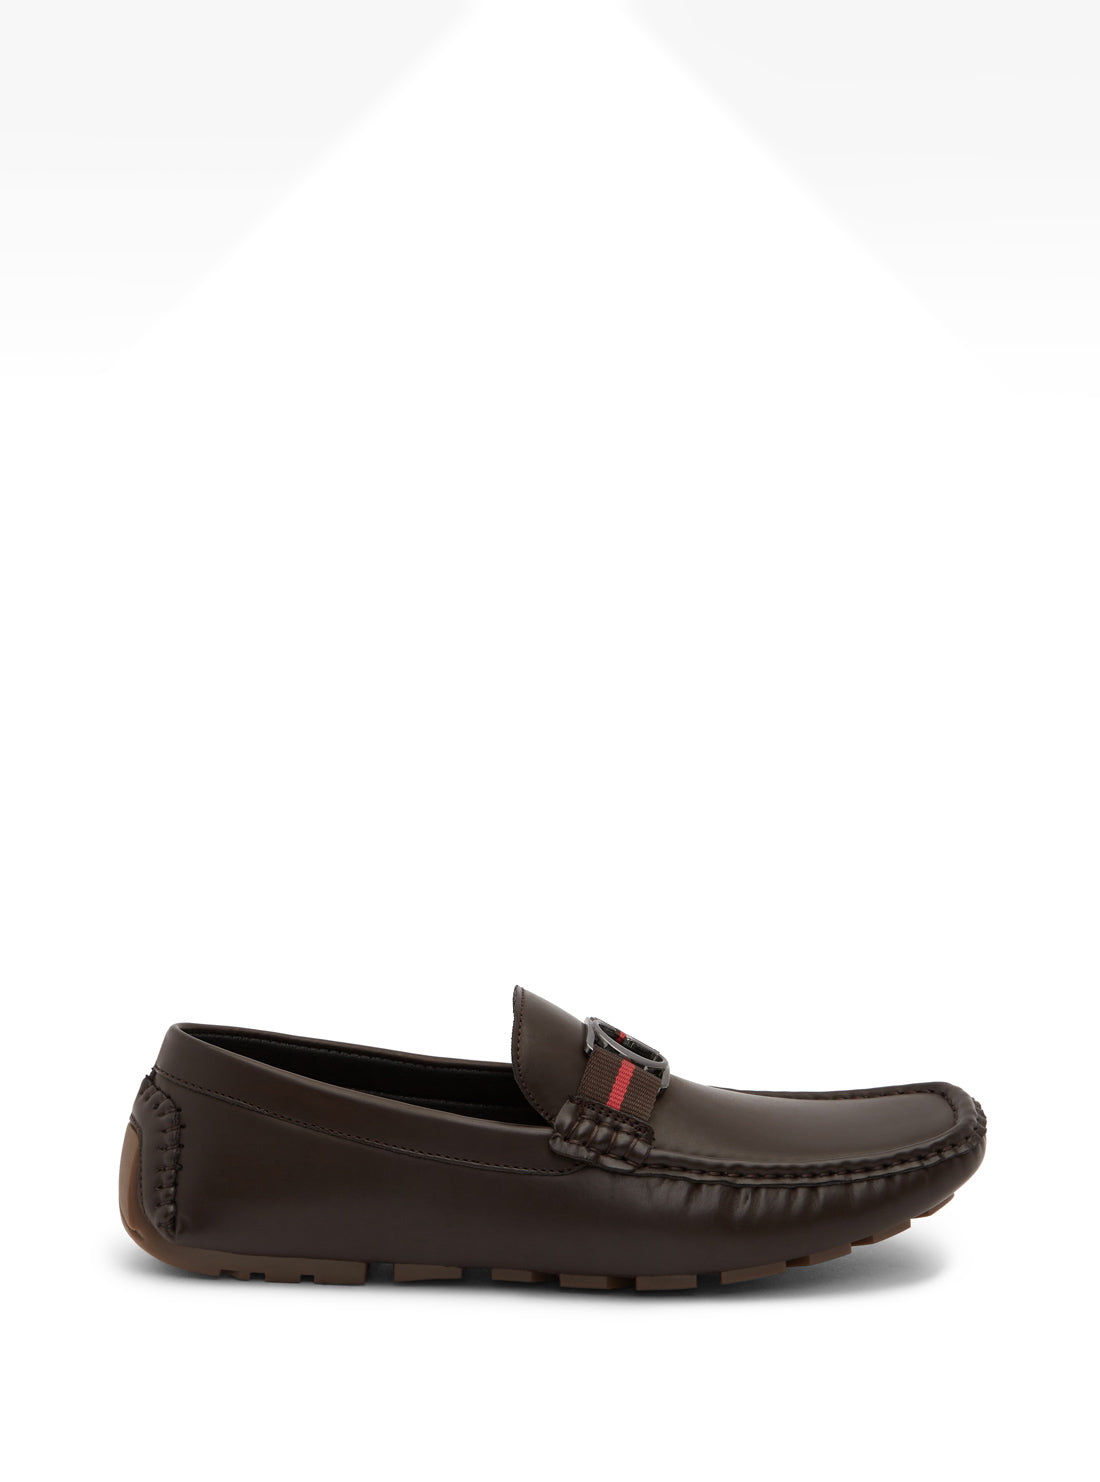 GUESS Men's Brown Askers Loafers ASKERS Side View